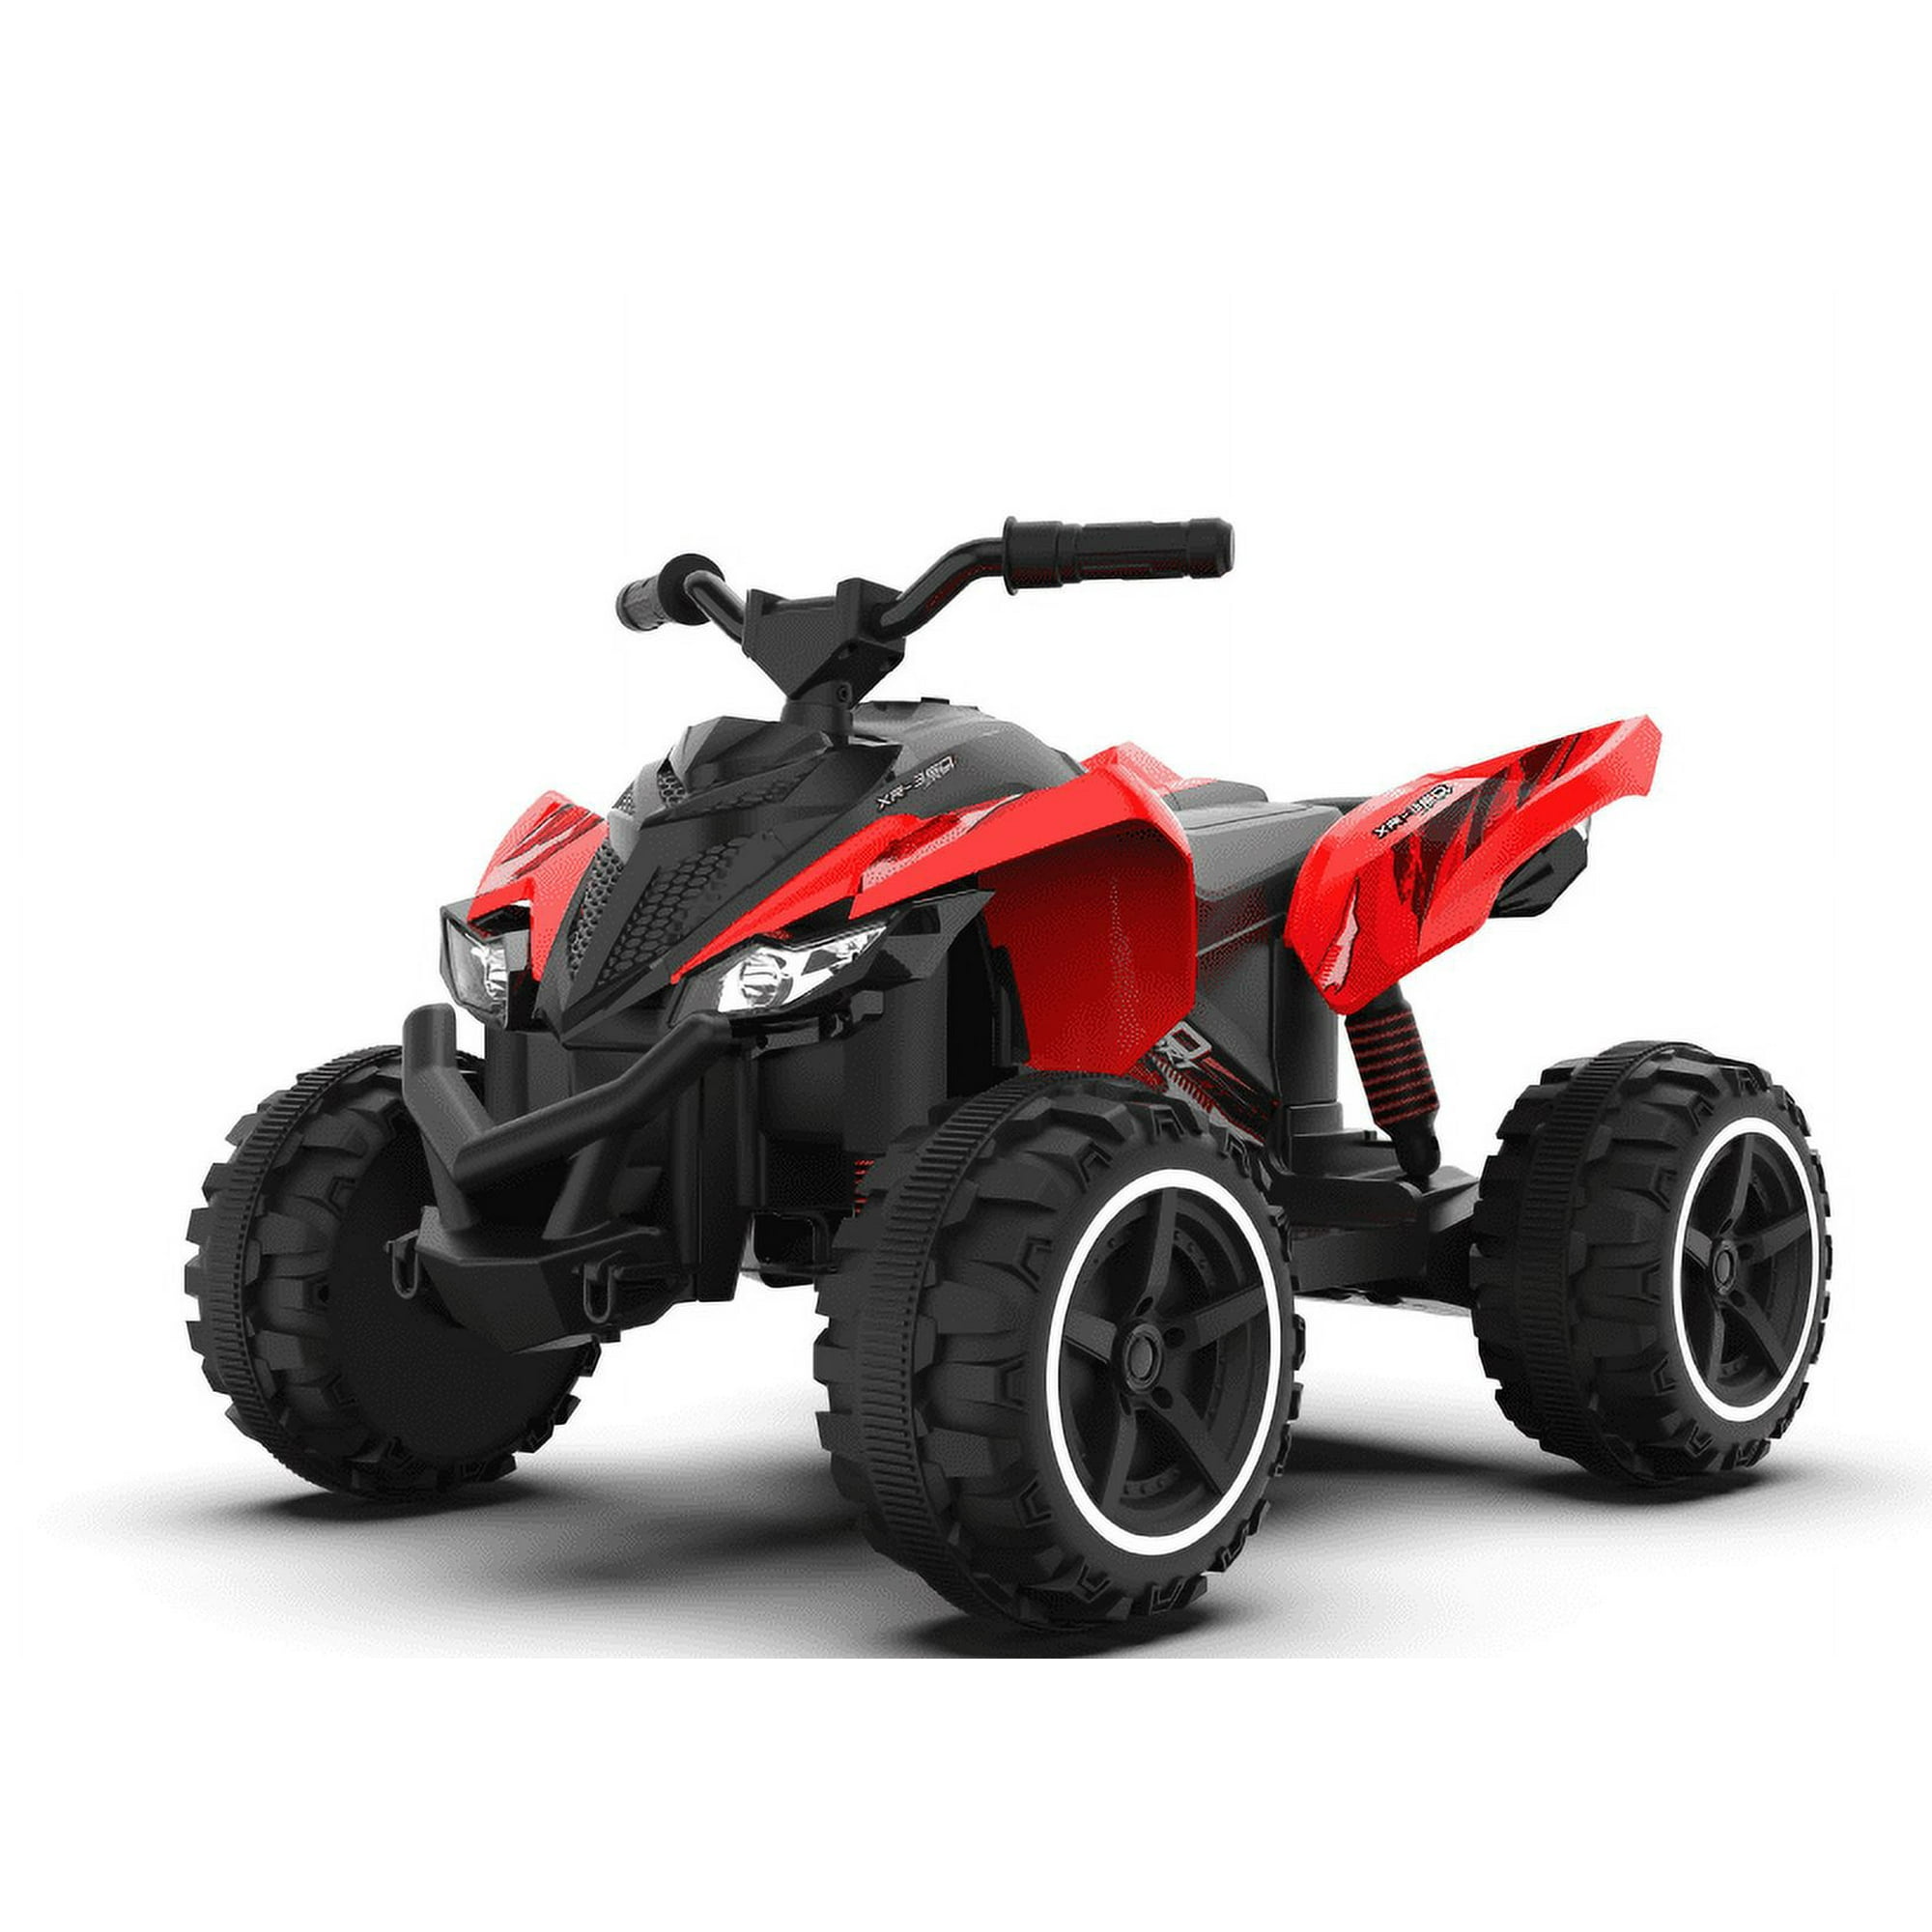 Generic 12V XR-350 ATV Powered Ride-on by Action Wheels